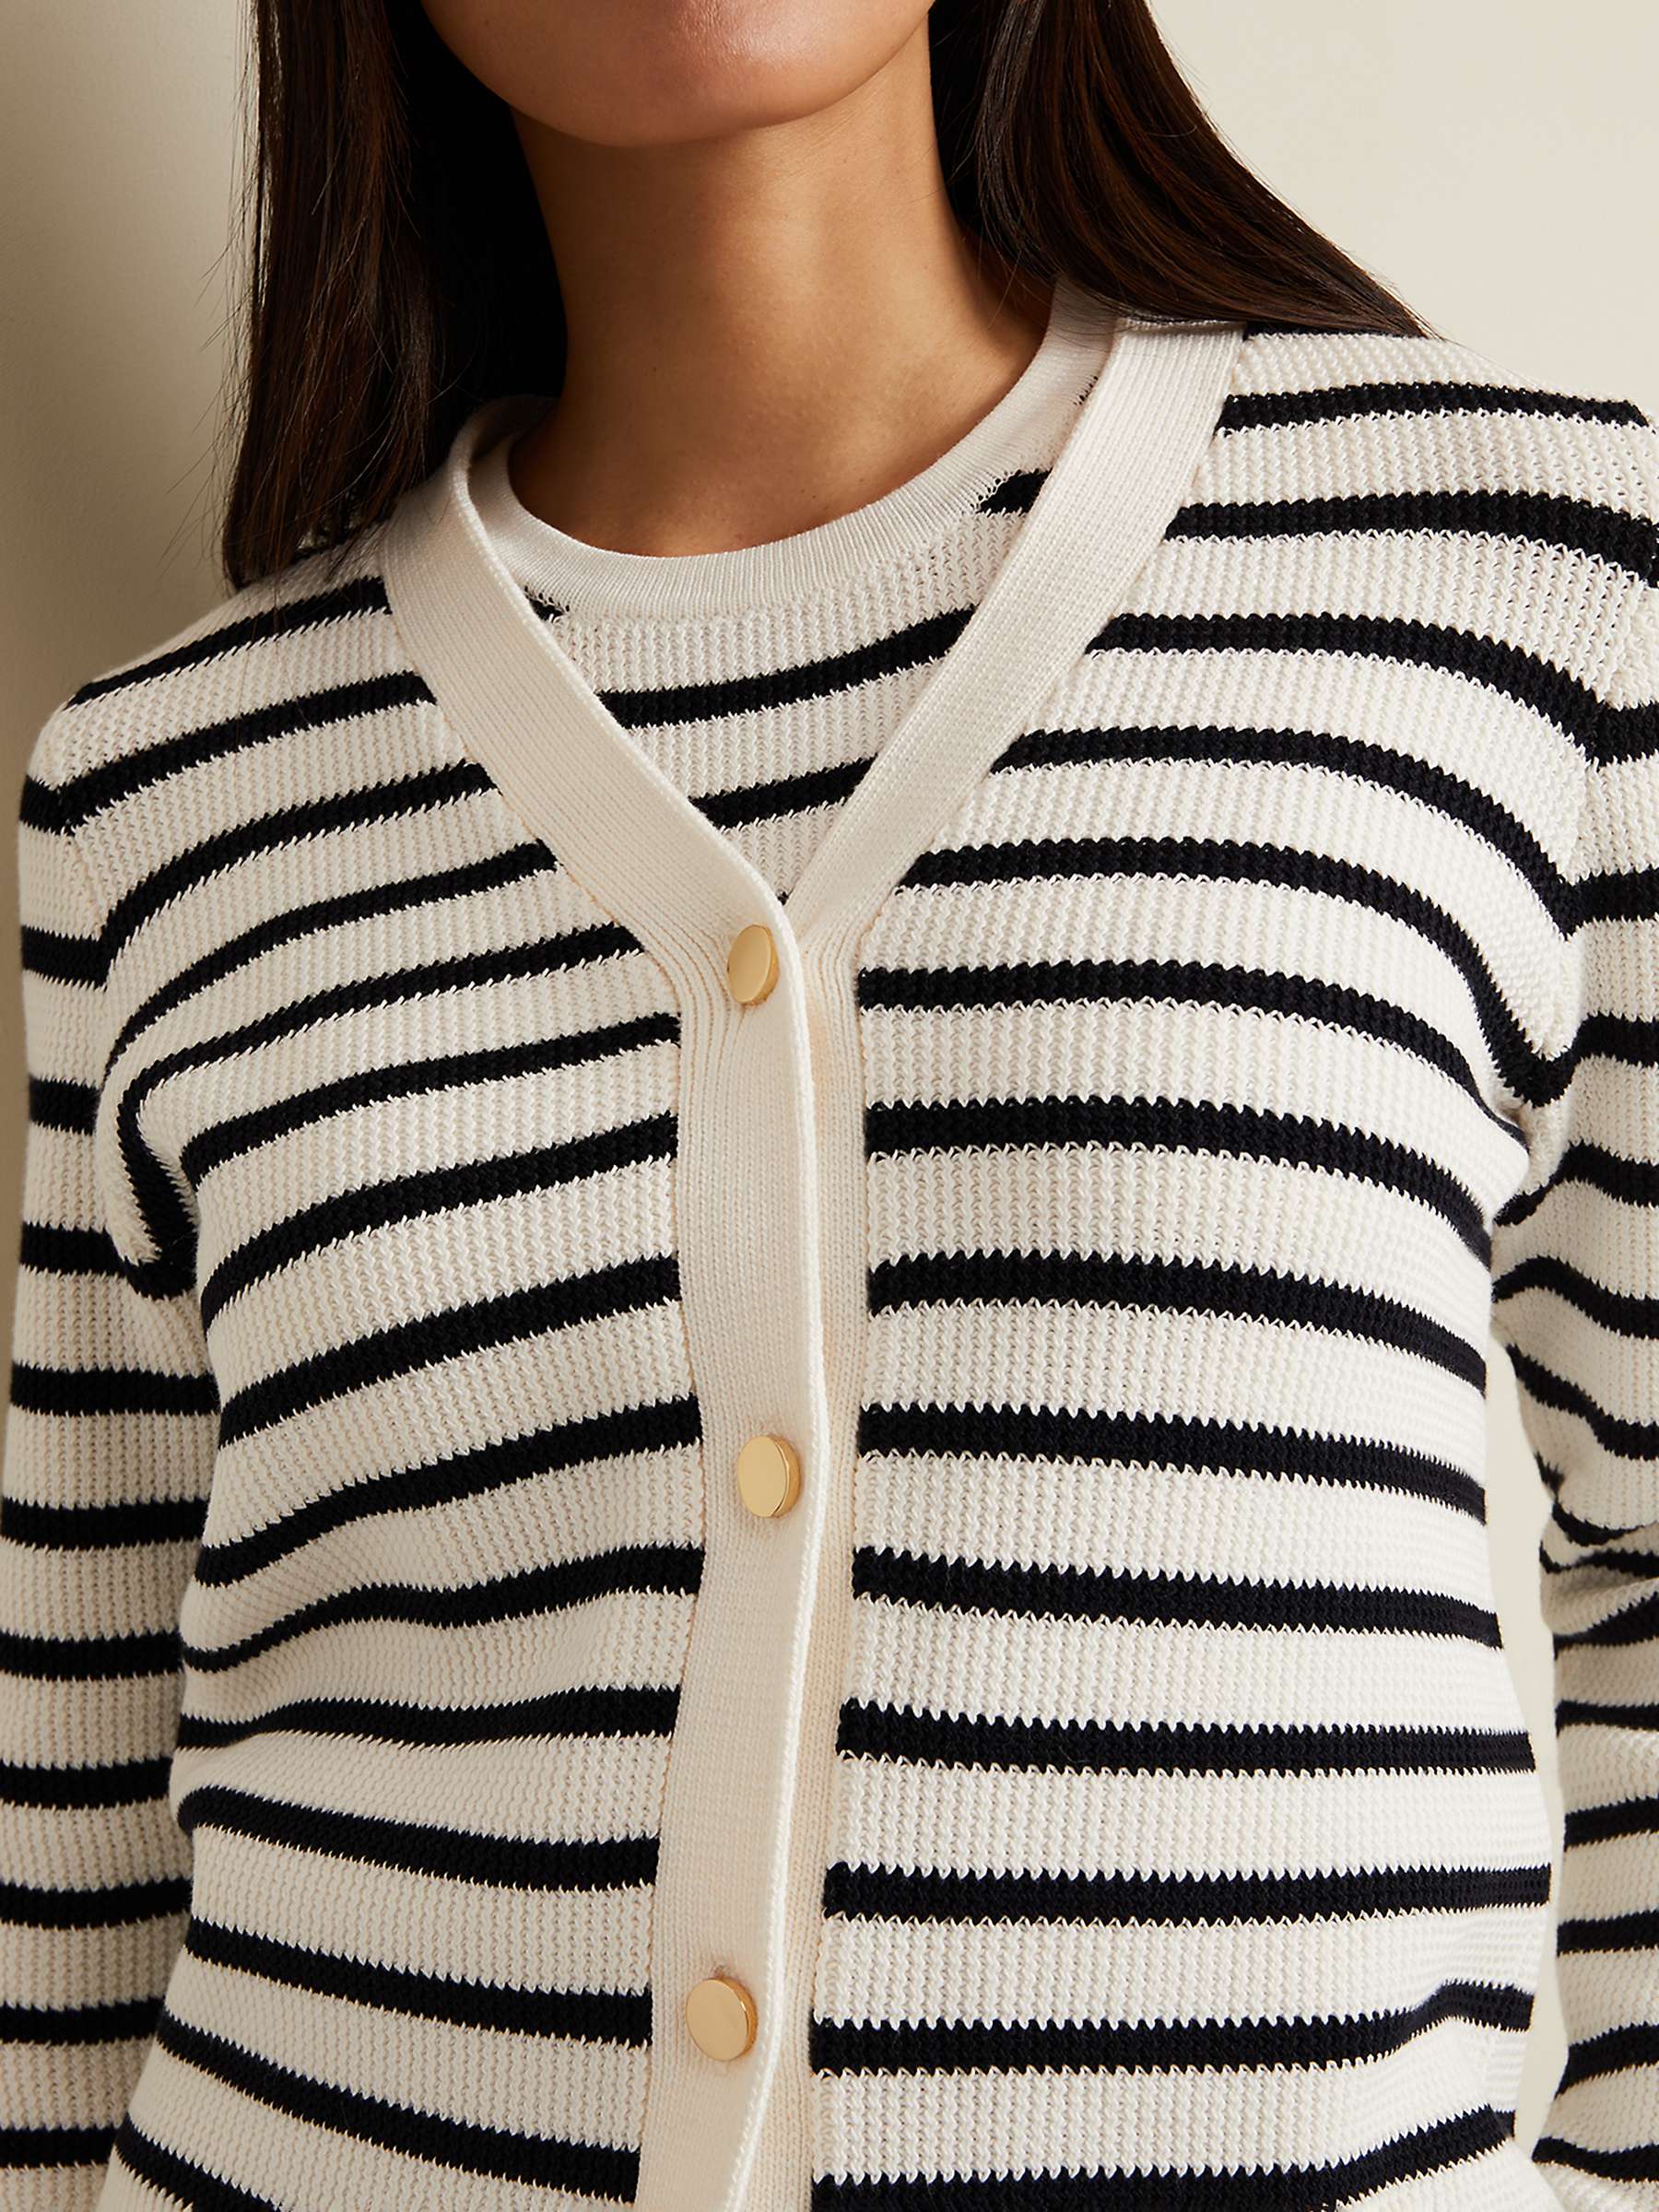 Buy Phase Eight Chloe Cotton Blend Cardigan, Ivory/Navy Online at johnlewis.com